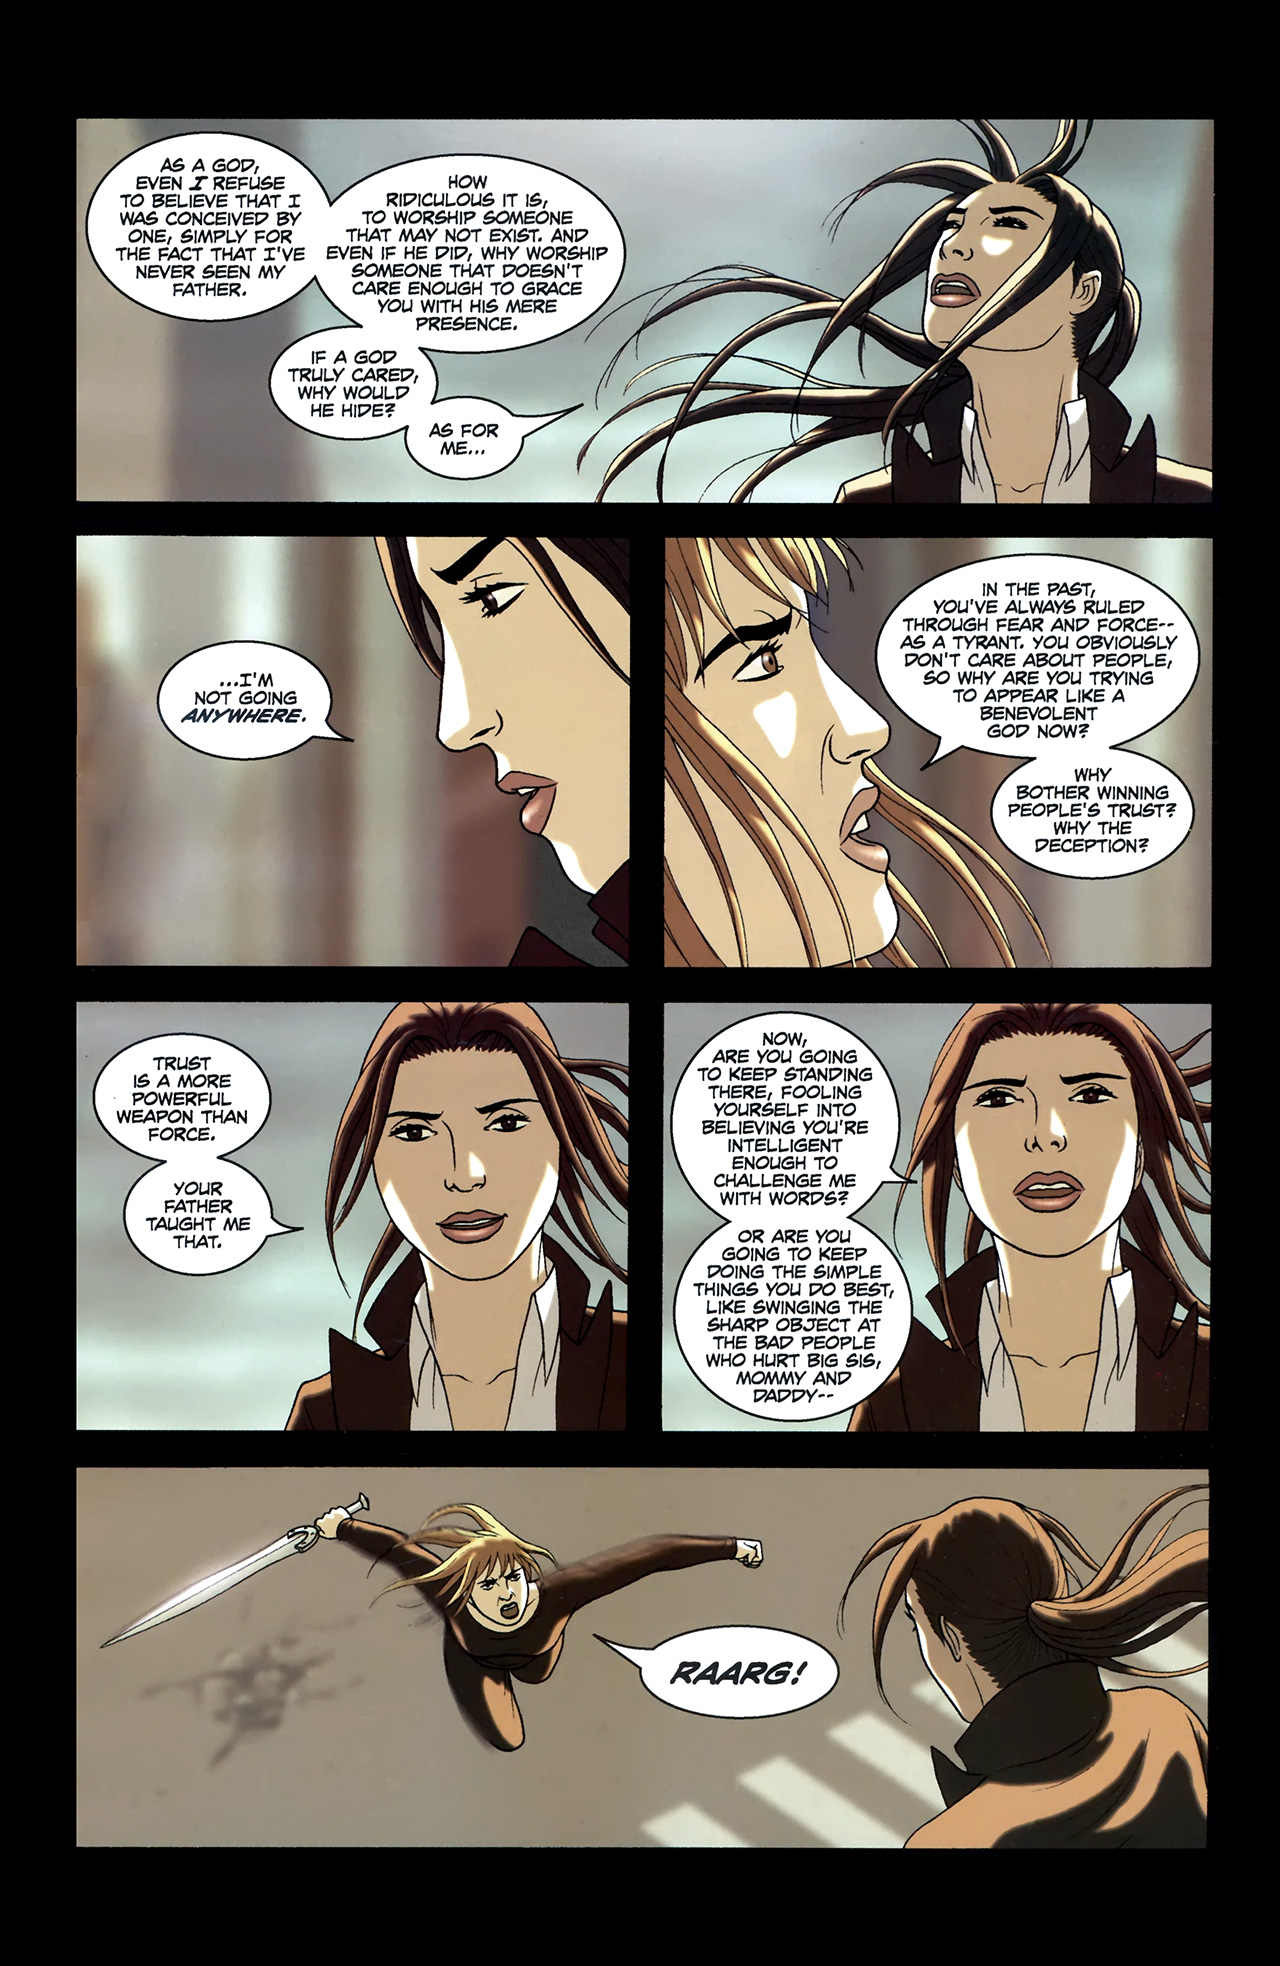 Read online The Sword comic -  Issue #22 - 8